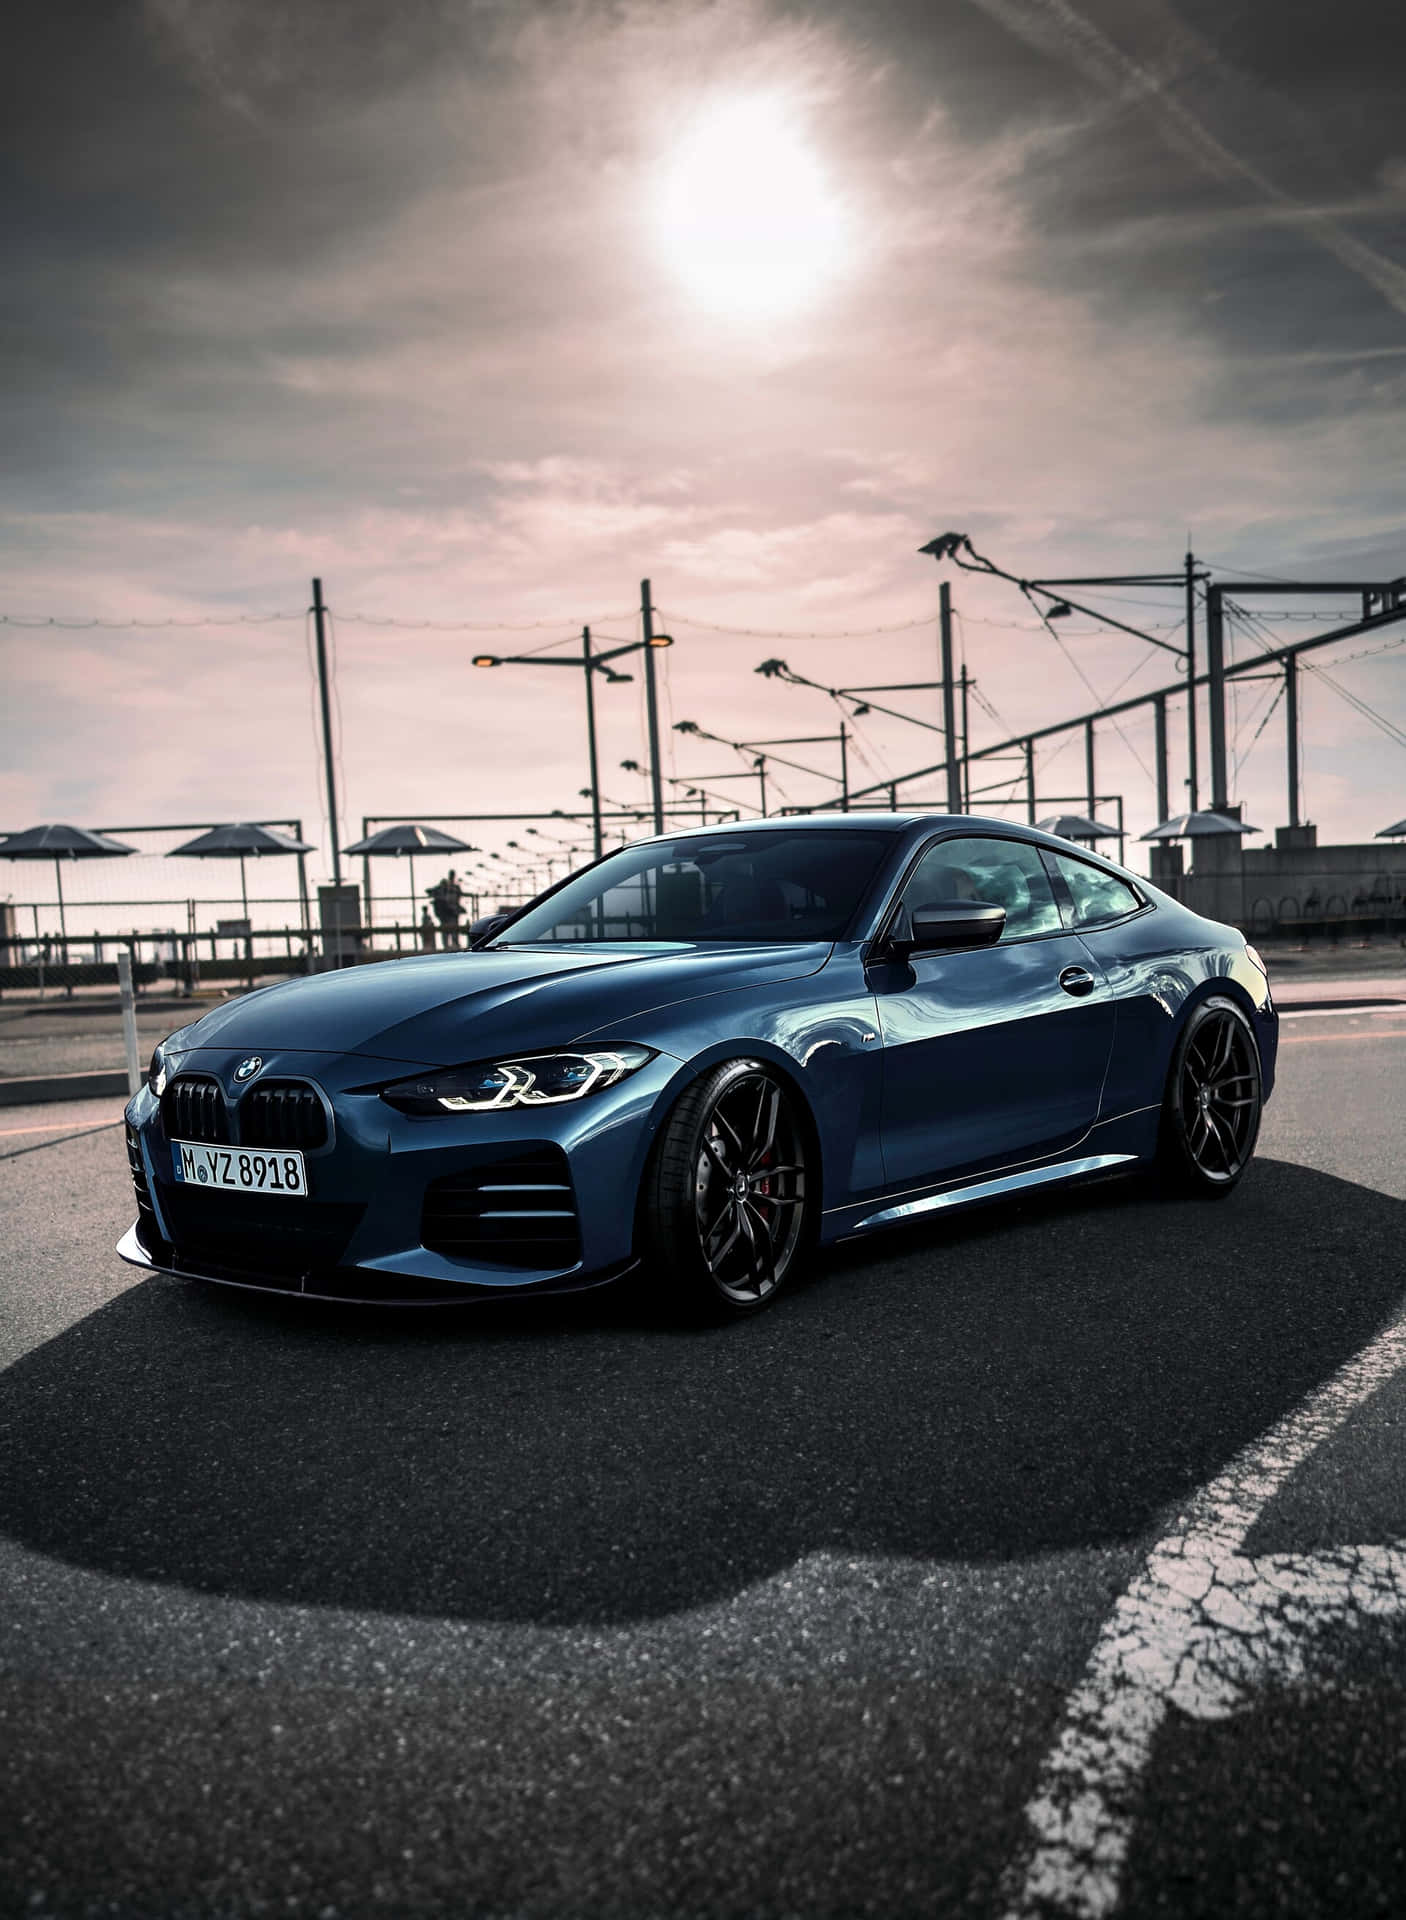 Elegant Style and Power Represented with the BMW 440i. Wallpaper